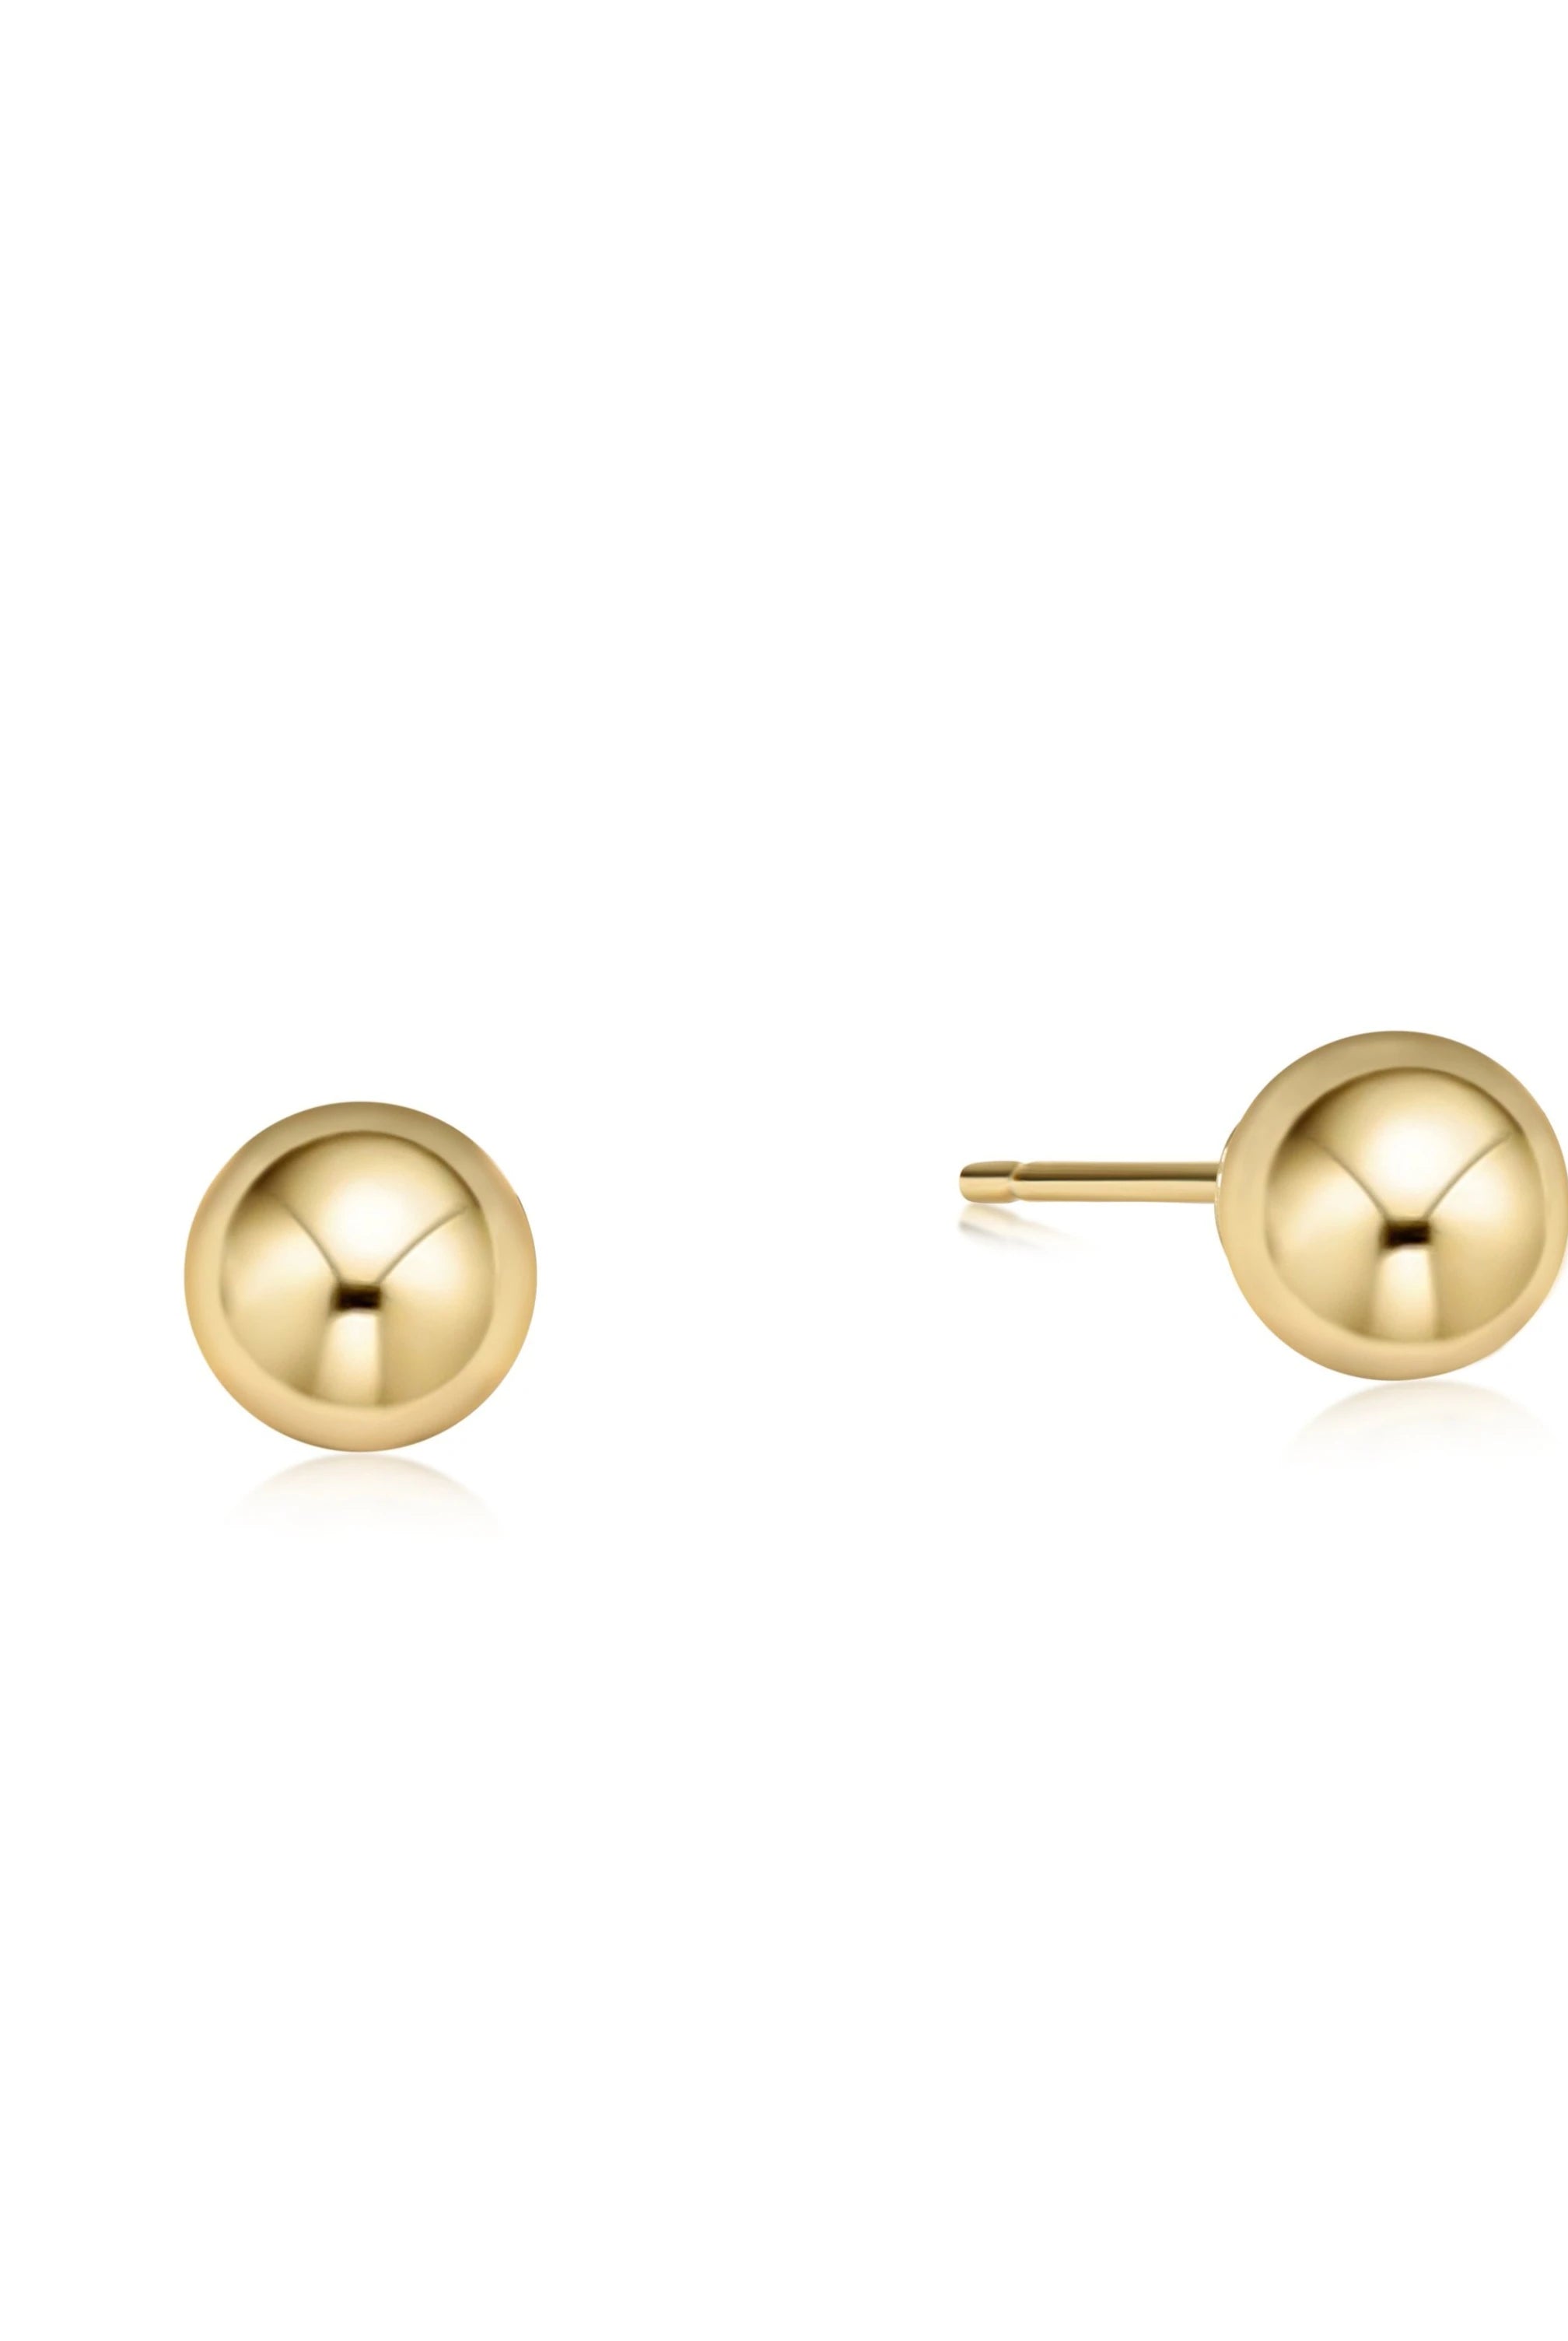 Classic 6mm Gold Ball Stud-Earrings-eNewton-The Lovely Closet, Women's Fashion Boutique in Alexandria, KY